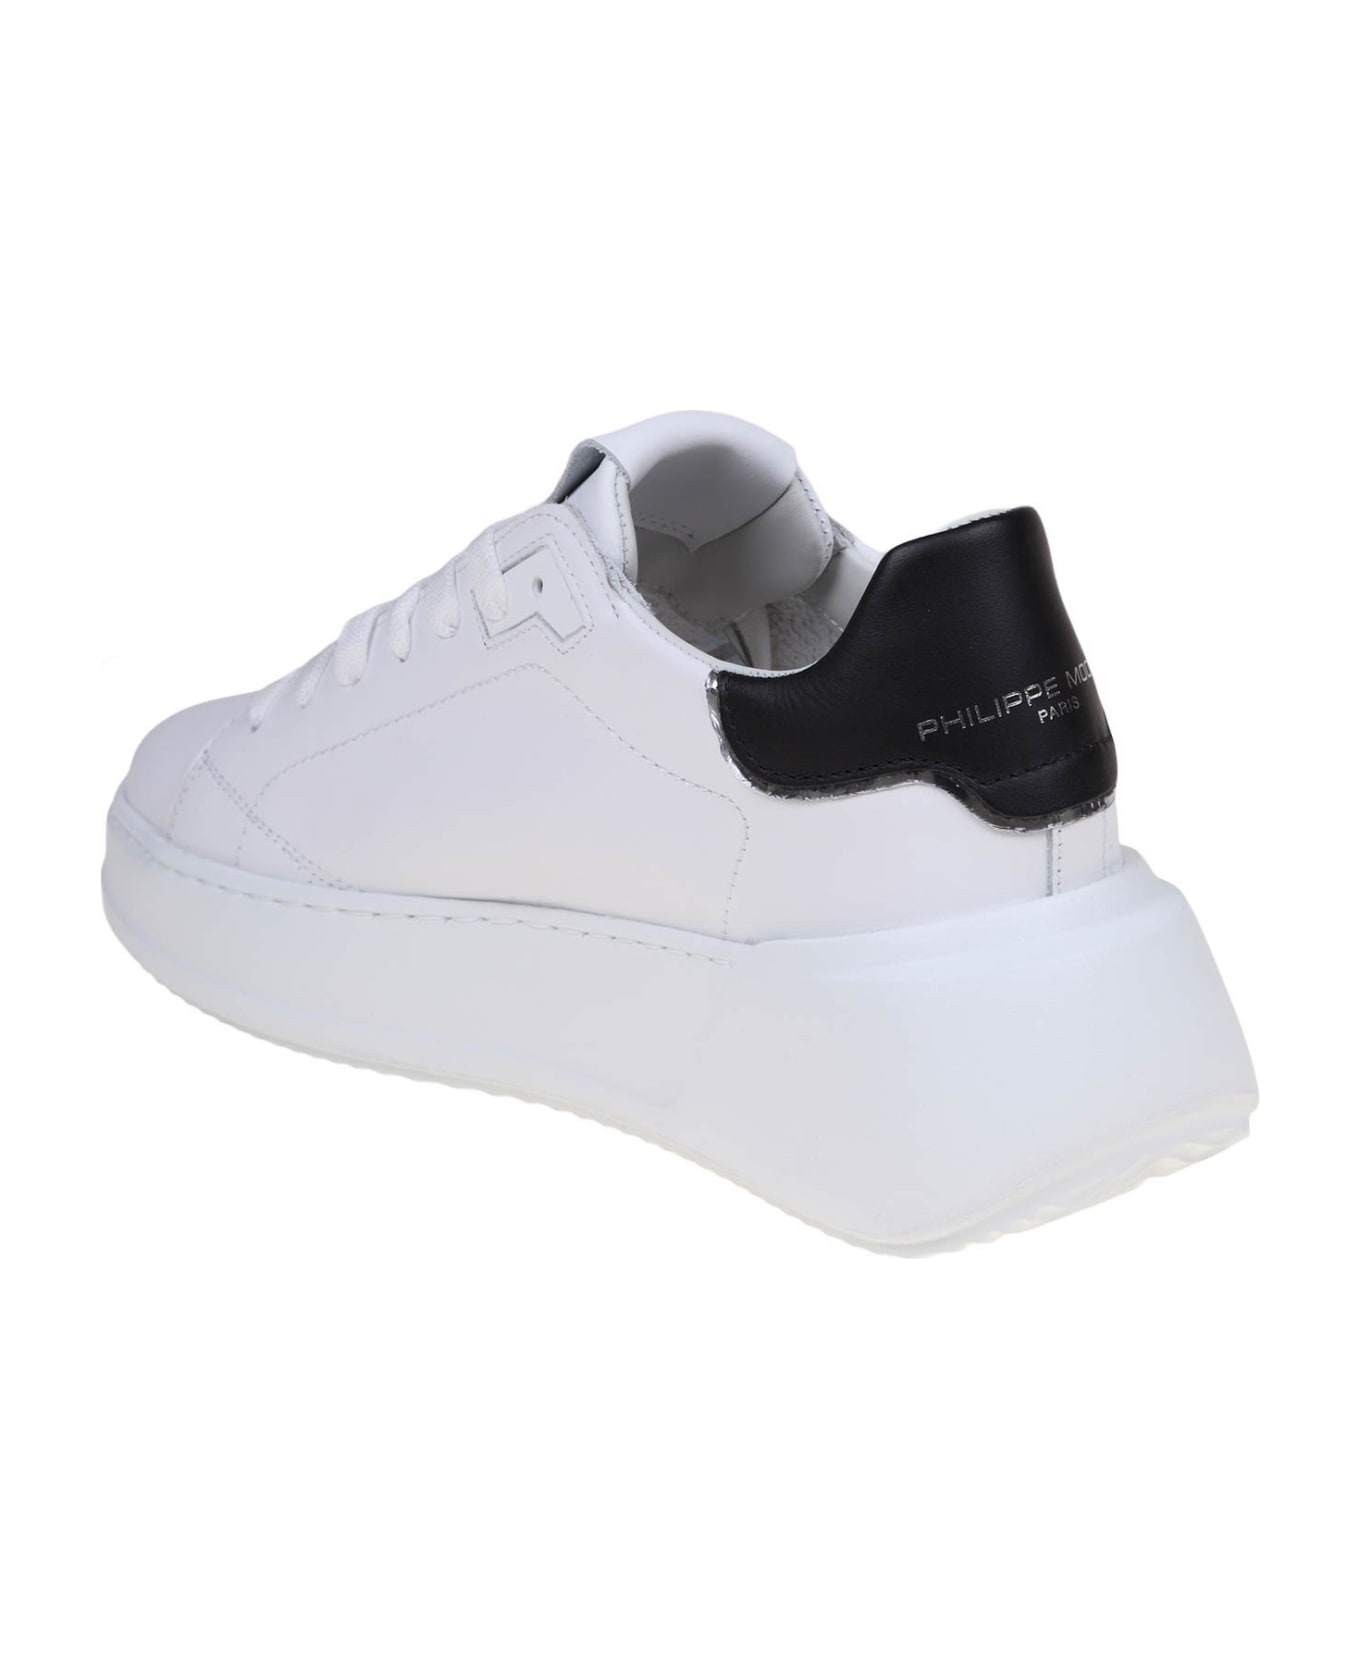 Philippe Model Tres Temple Low In Black And White Leather - White/Black スニーカー